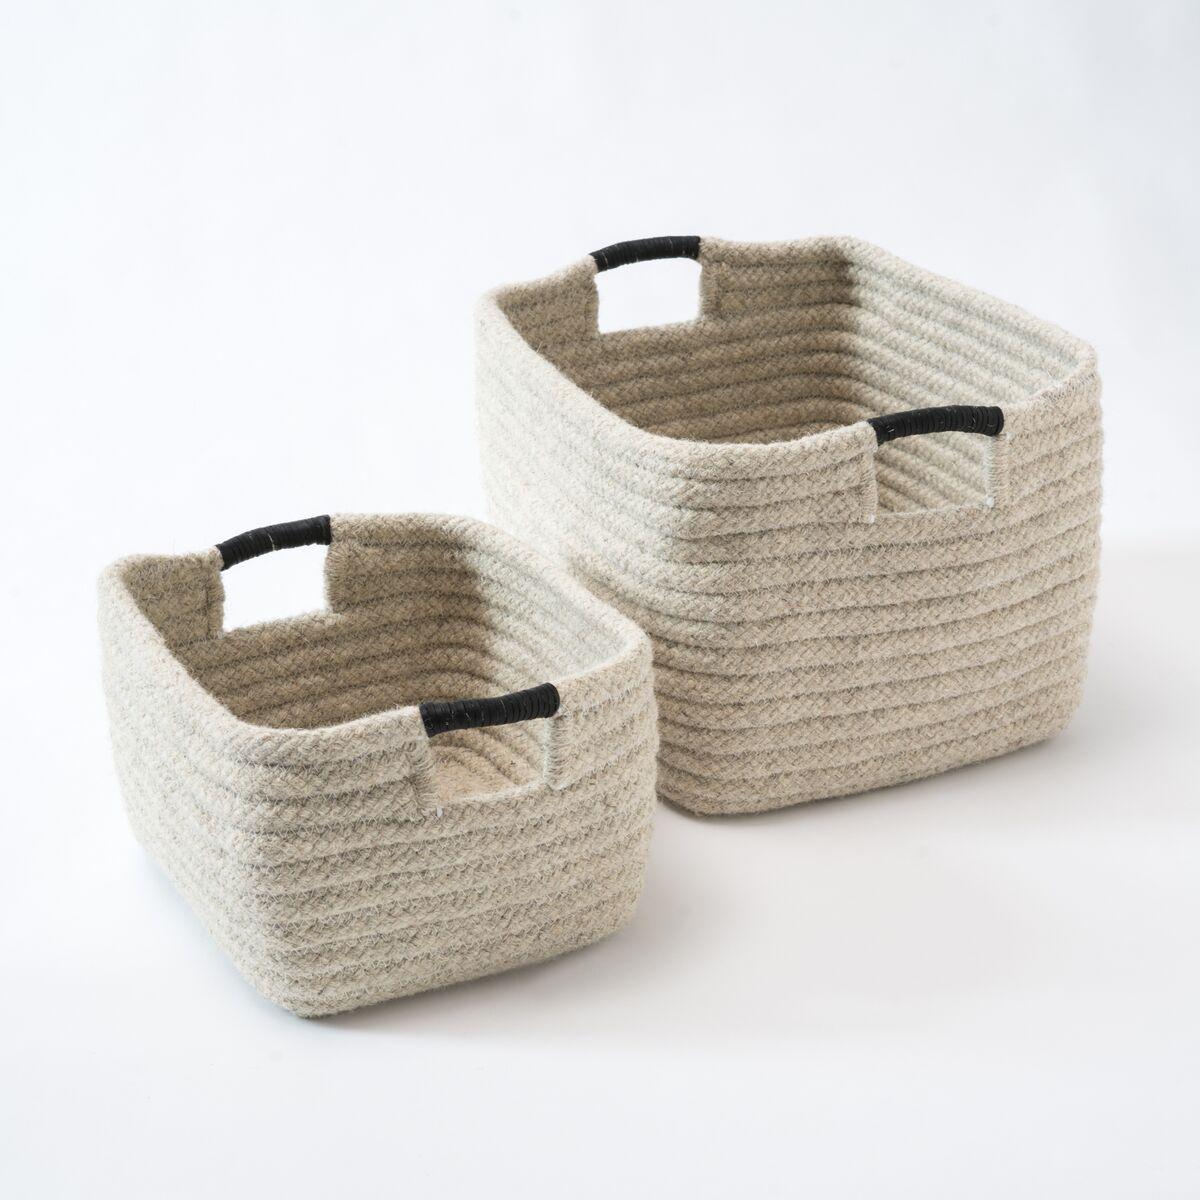 Organic Modern Natural Wool Basket in Light Grey, Leather Wrap Handles, Woven in the USA